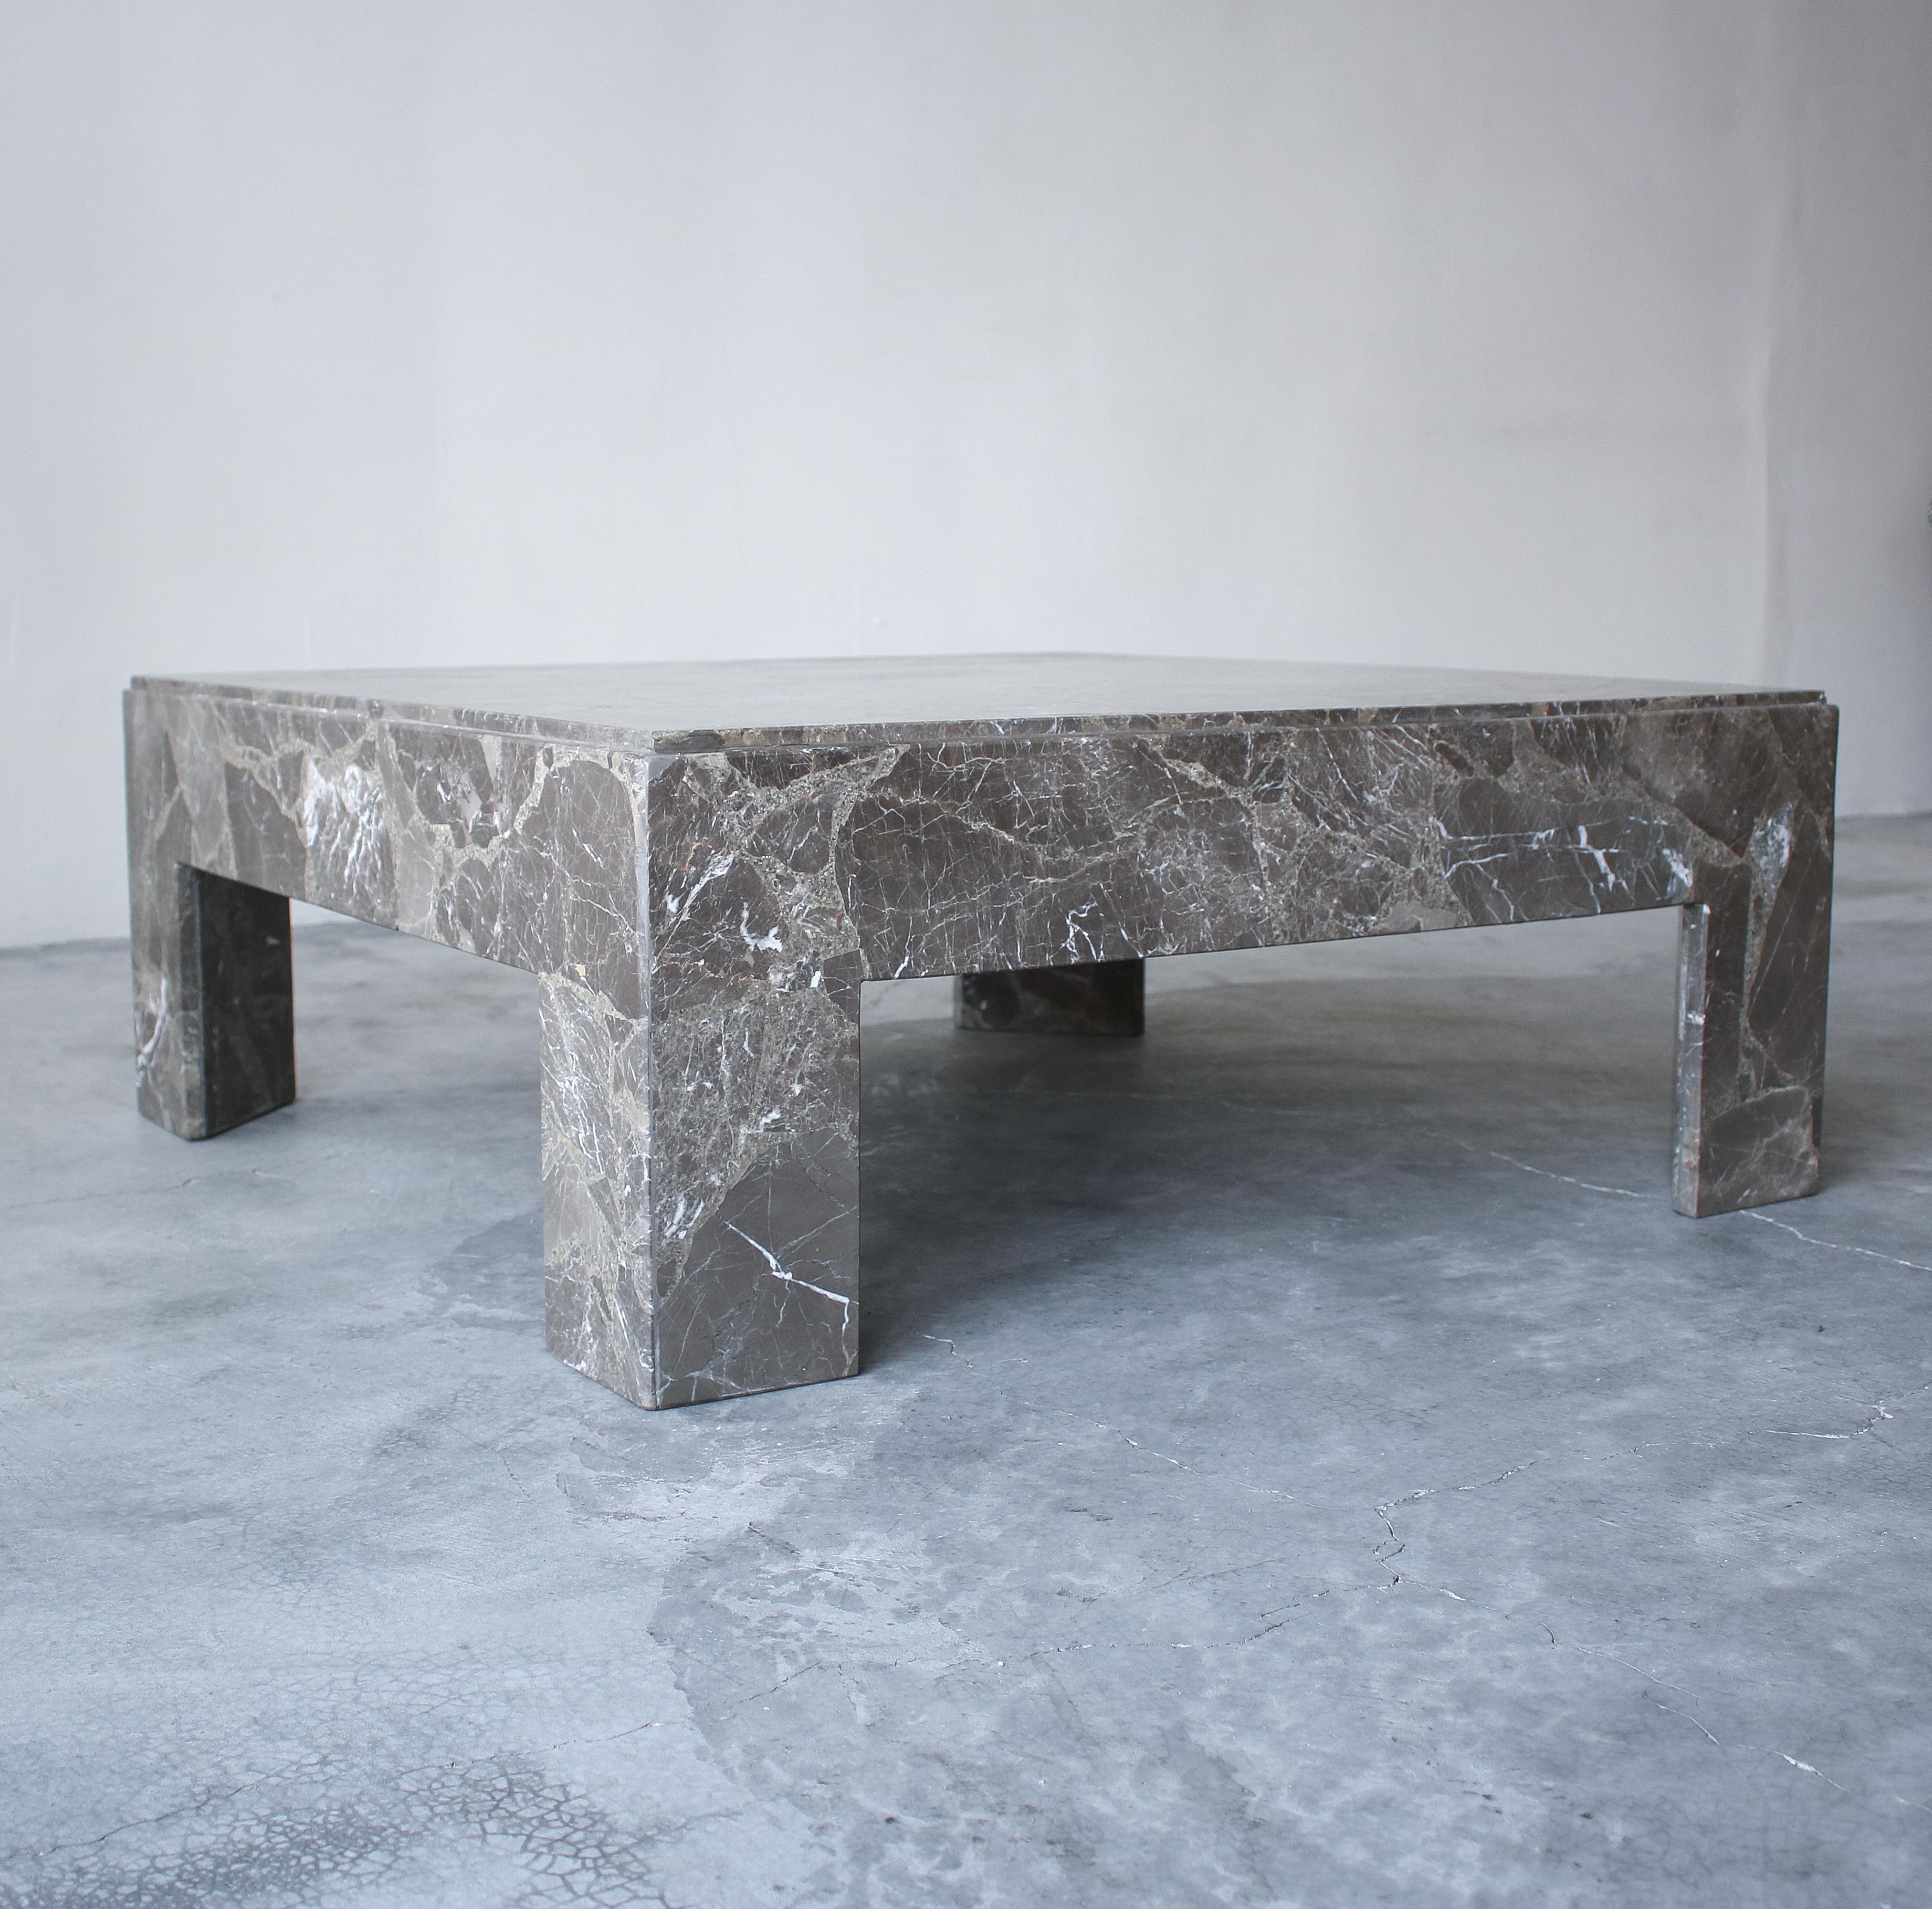 Rare vintage dark Emperador Italian marble coffee table. Beautiful brown and white marbling. You don't see brown marble tables every day, if you are looking for a stone coffee table but want something different, this is the table for you

Table is